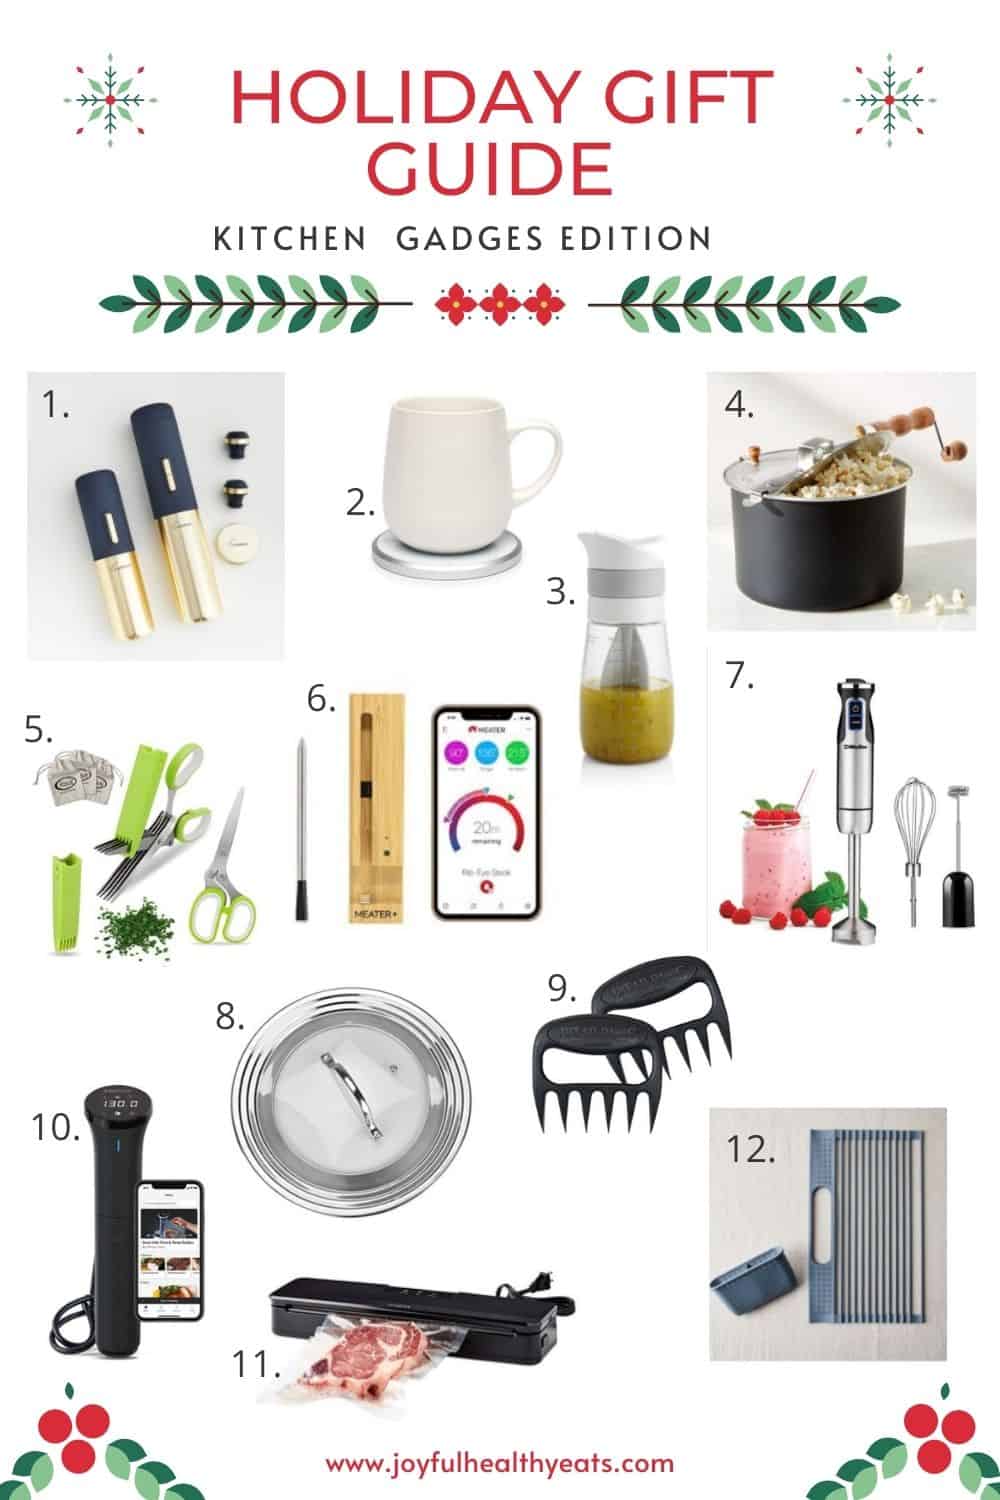 Christmas Gift Guide: 5 gadgets to make everyday life easier